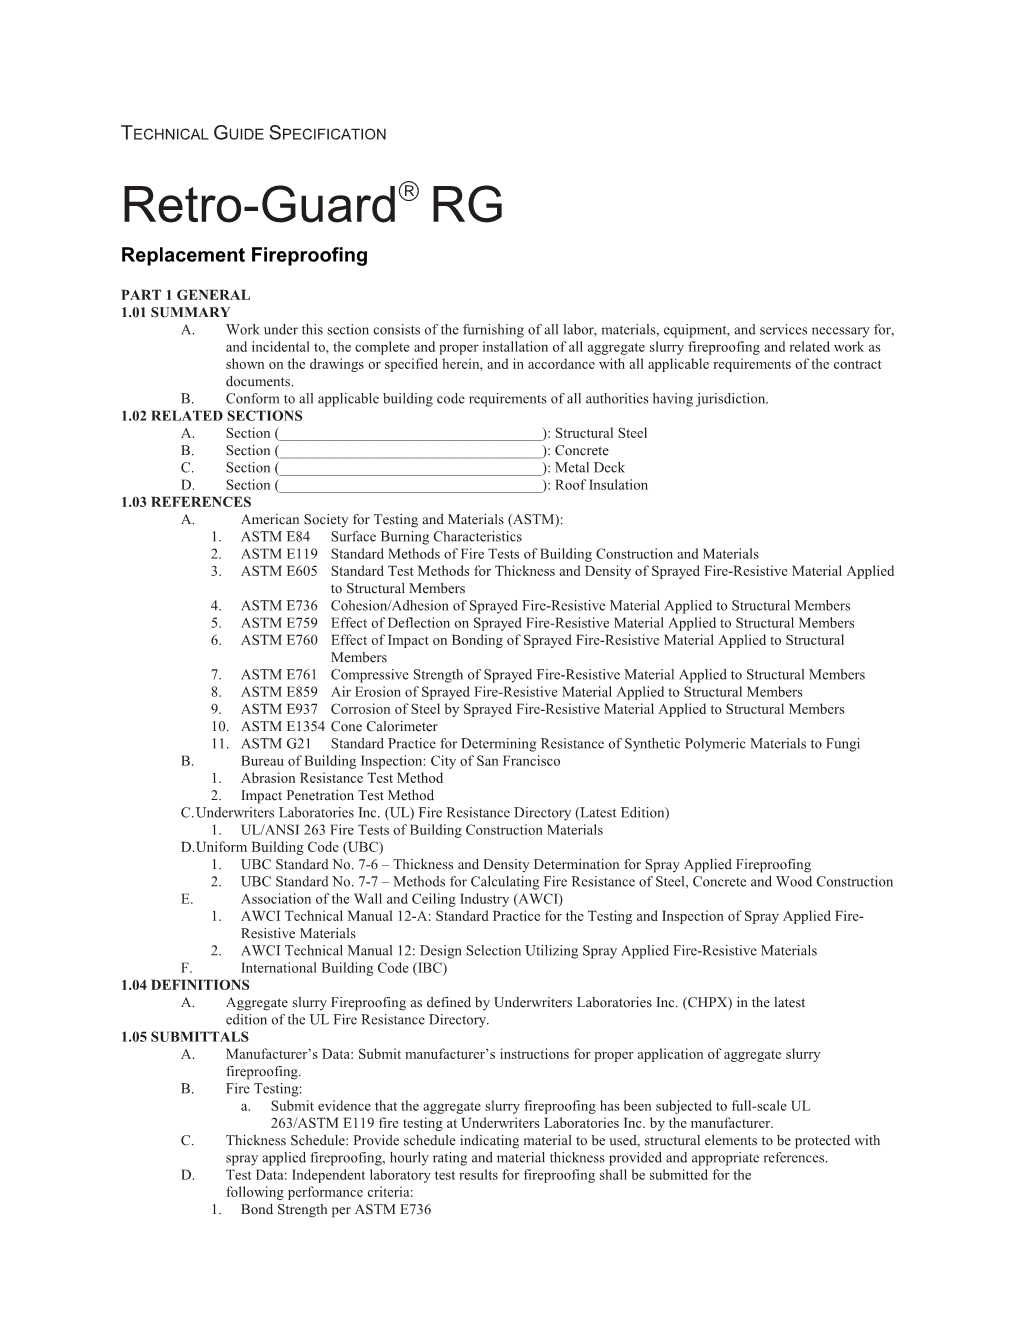 Retro-Guard RG Replacement Fireproofing